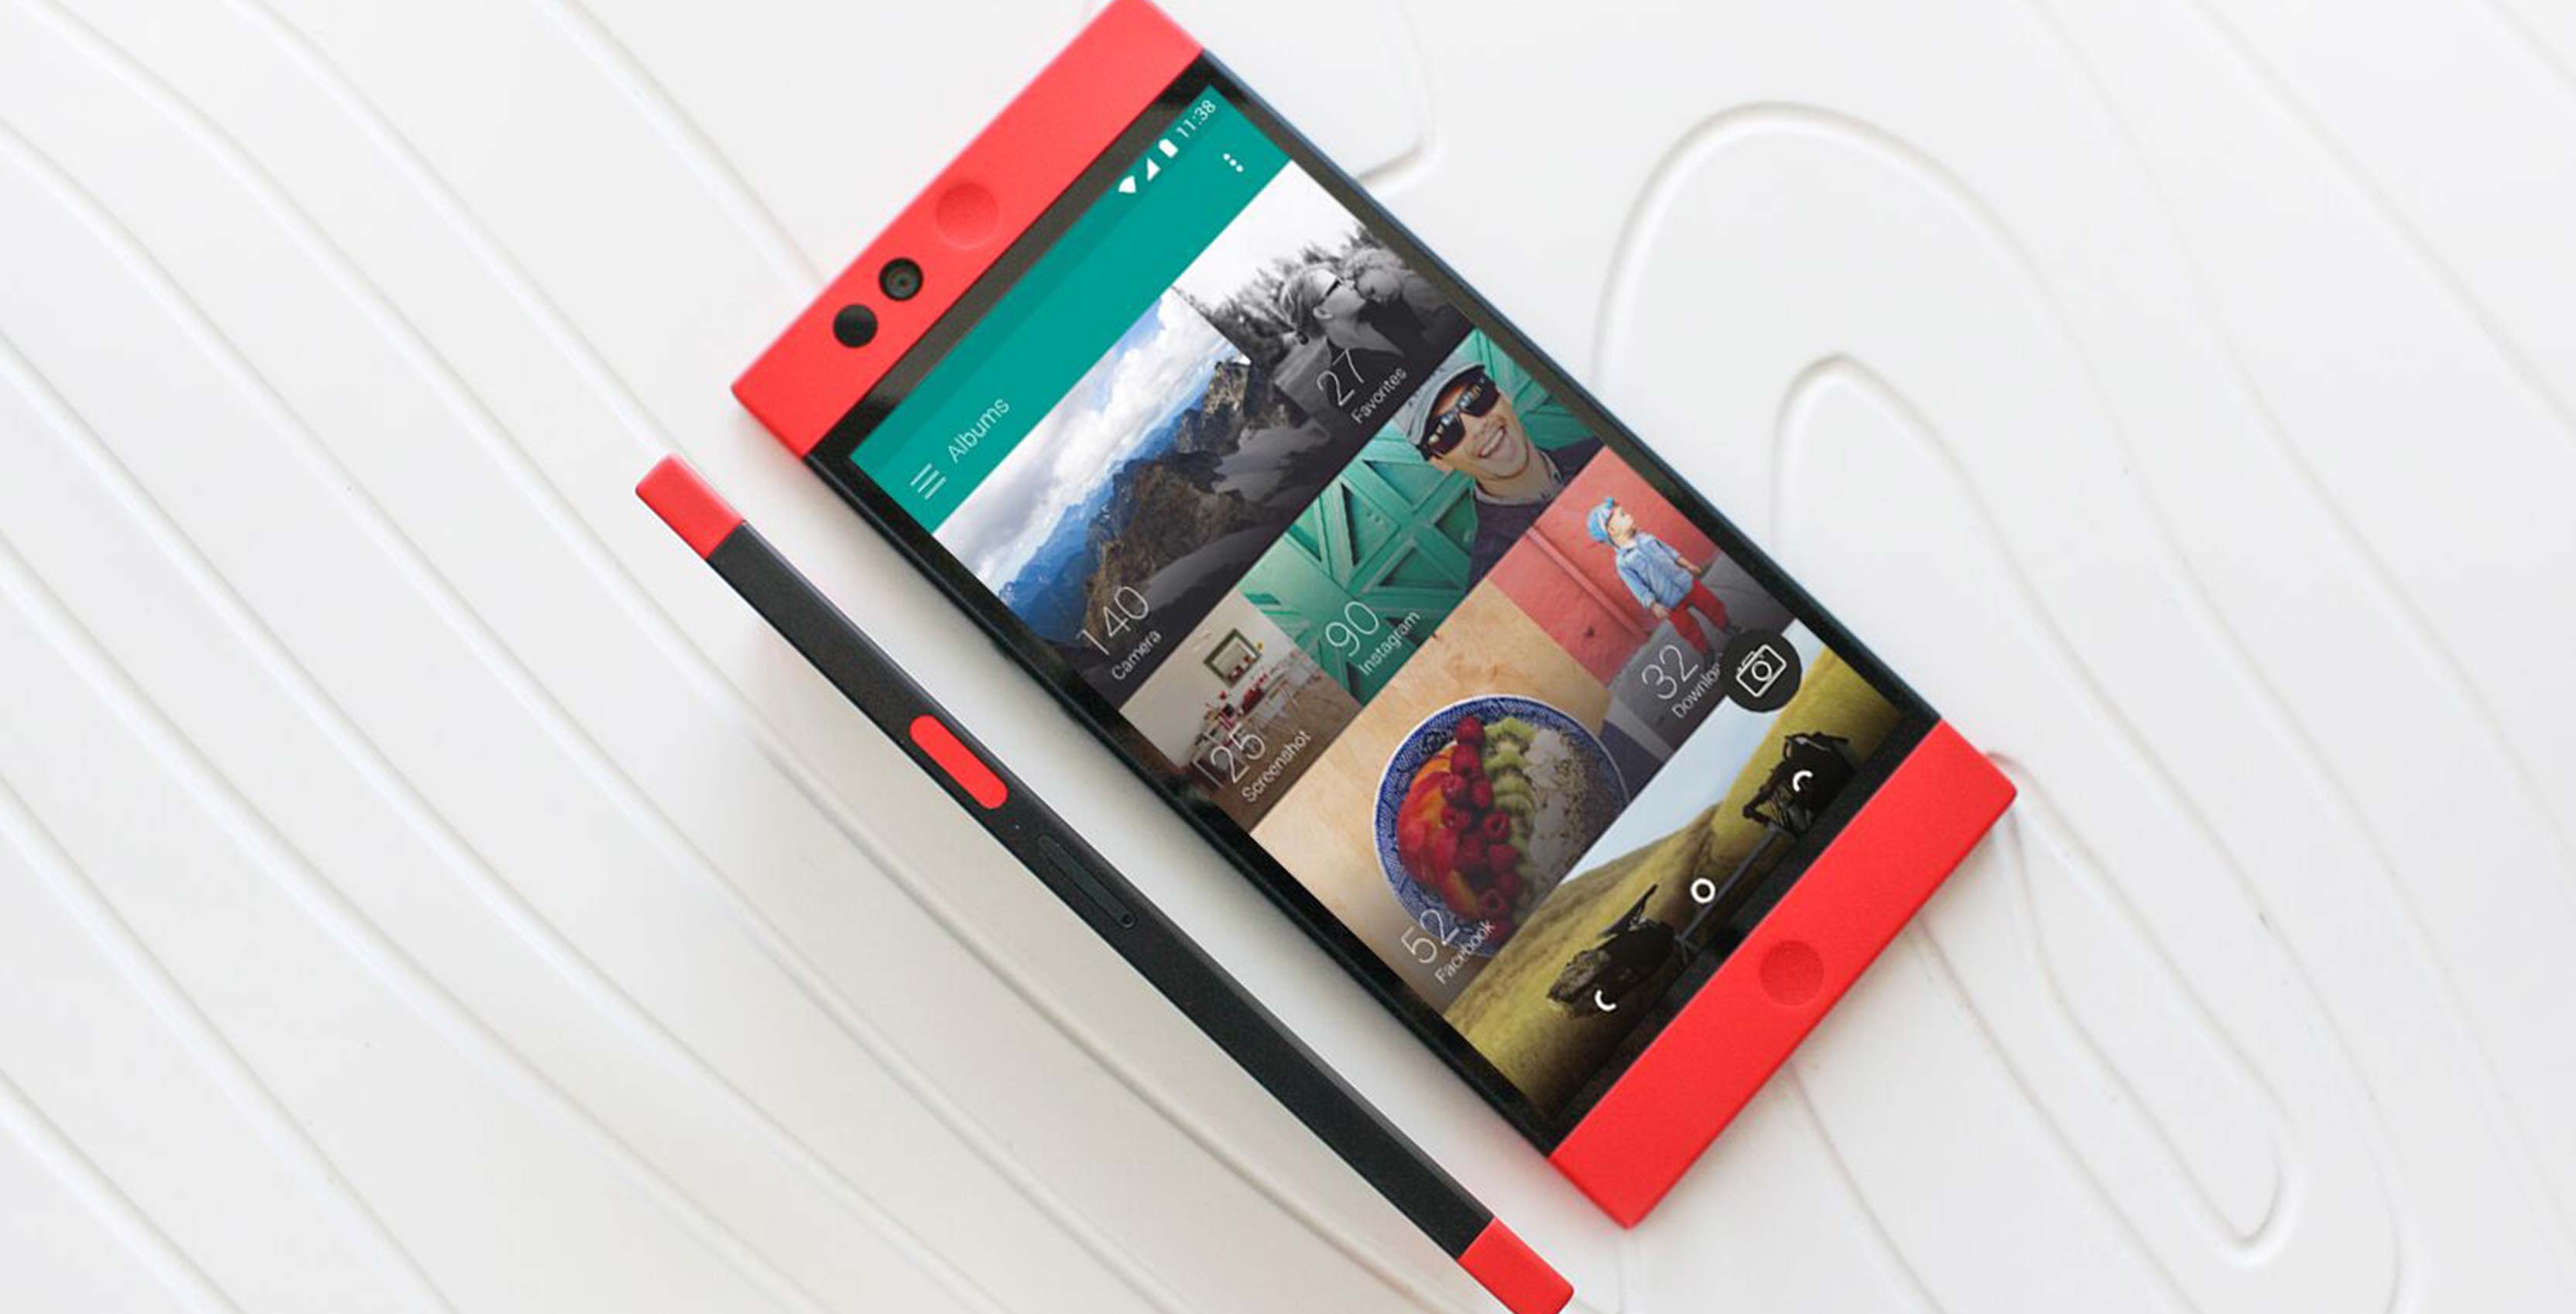 Nextbit's first and only smartphone, the Robin